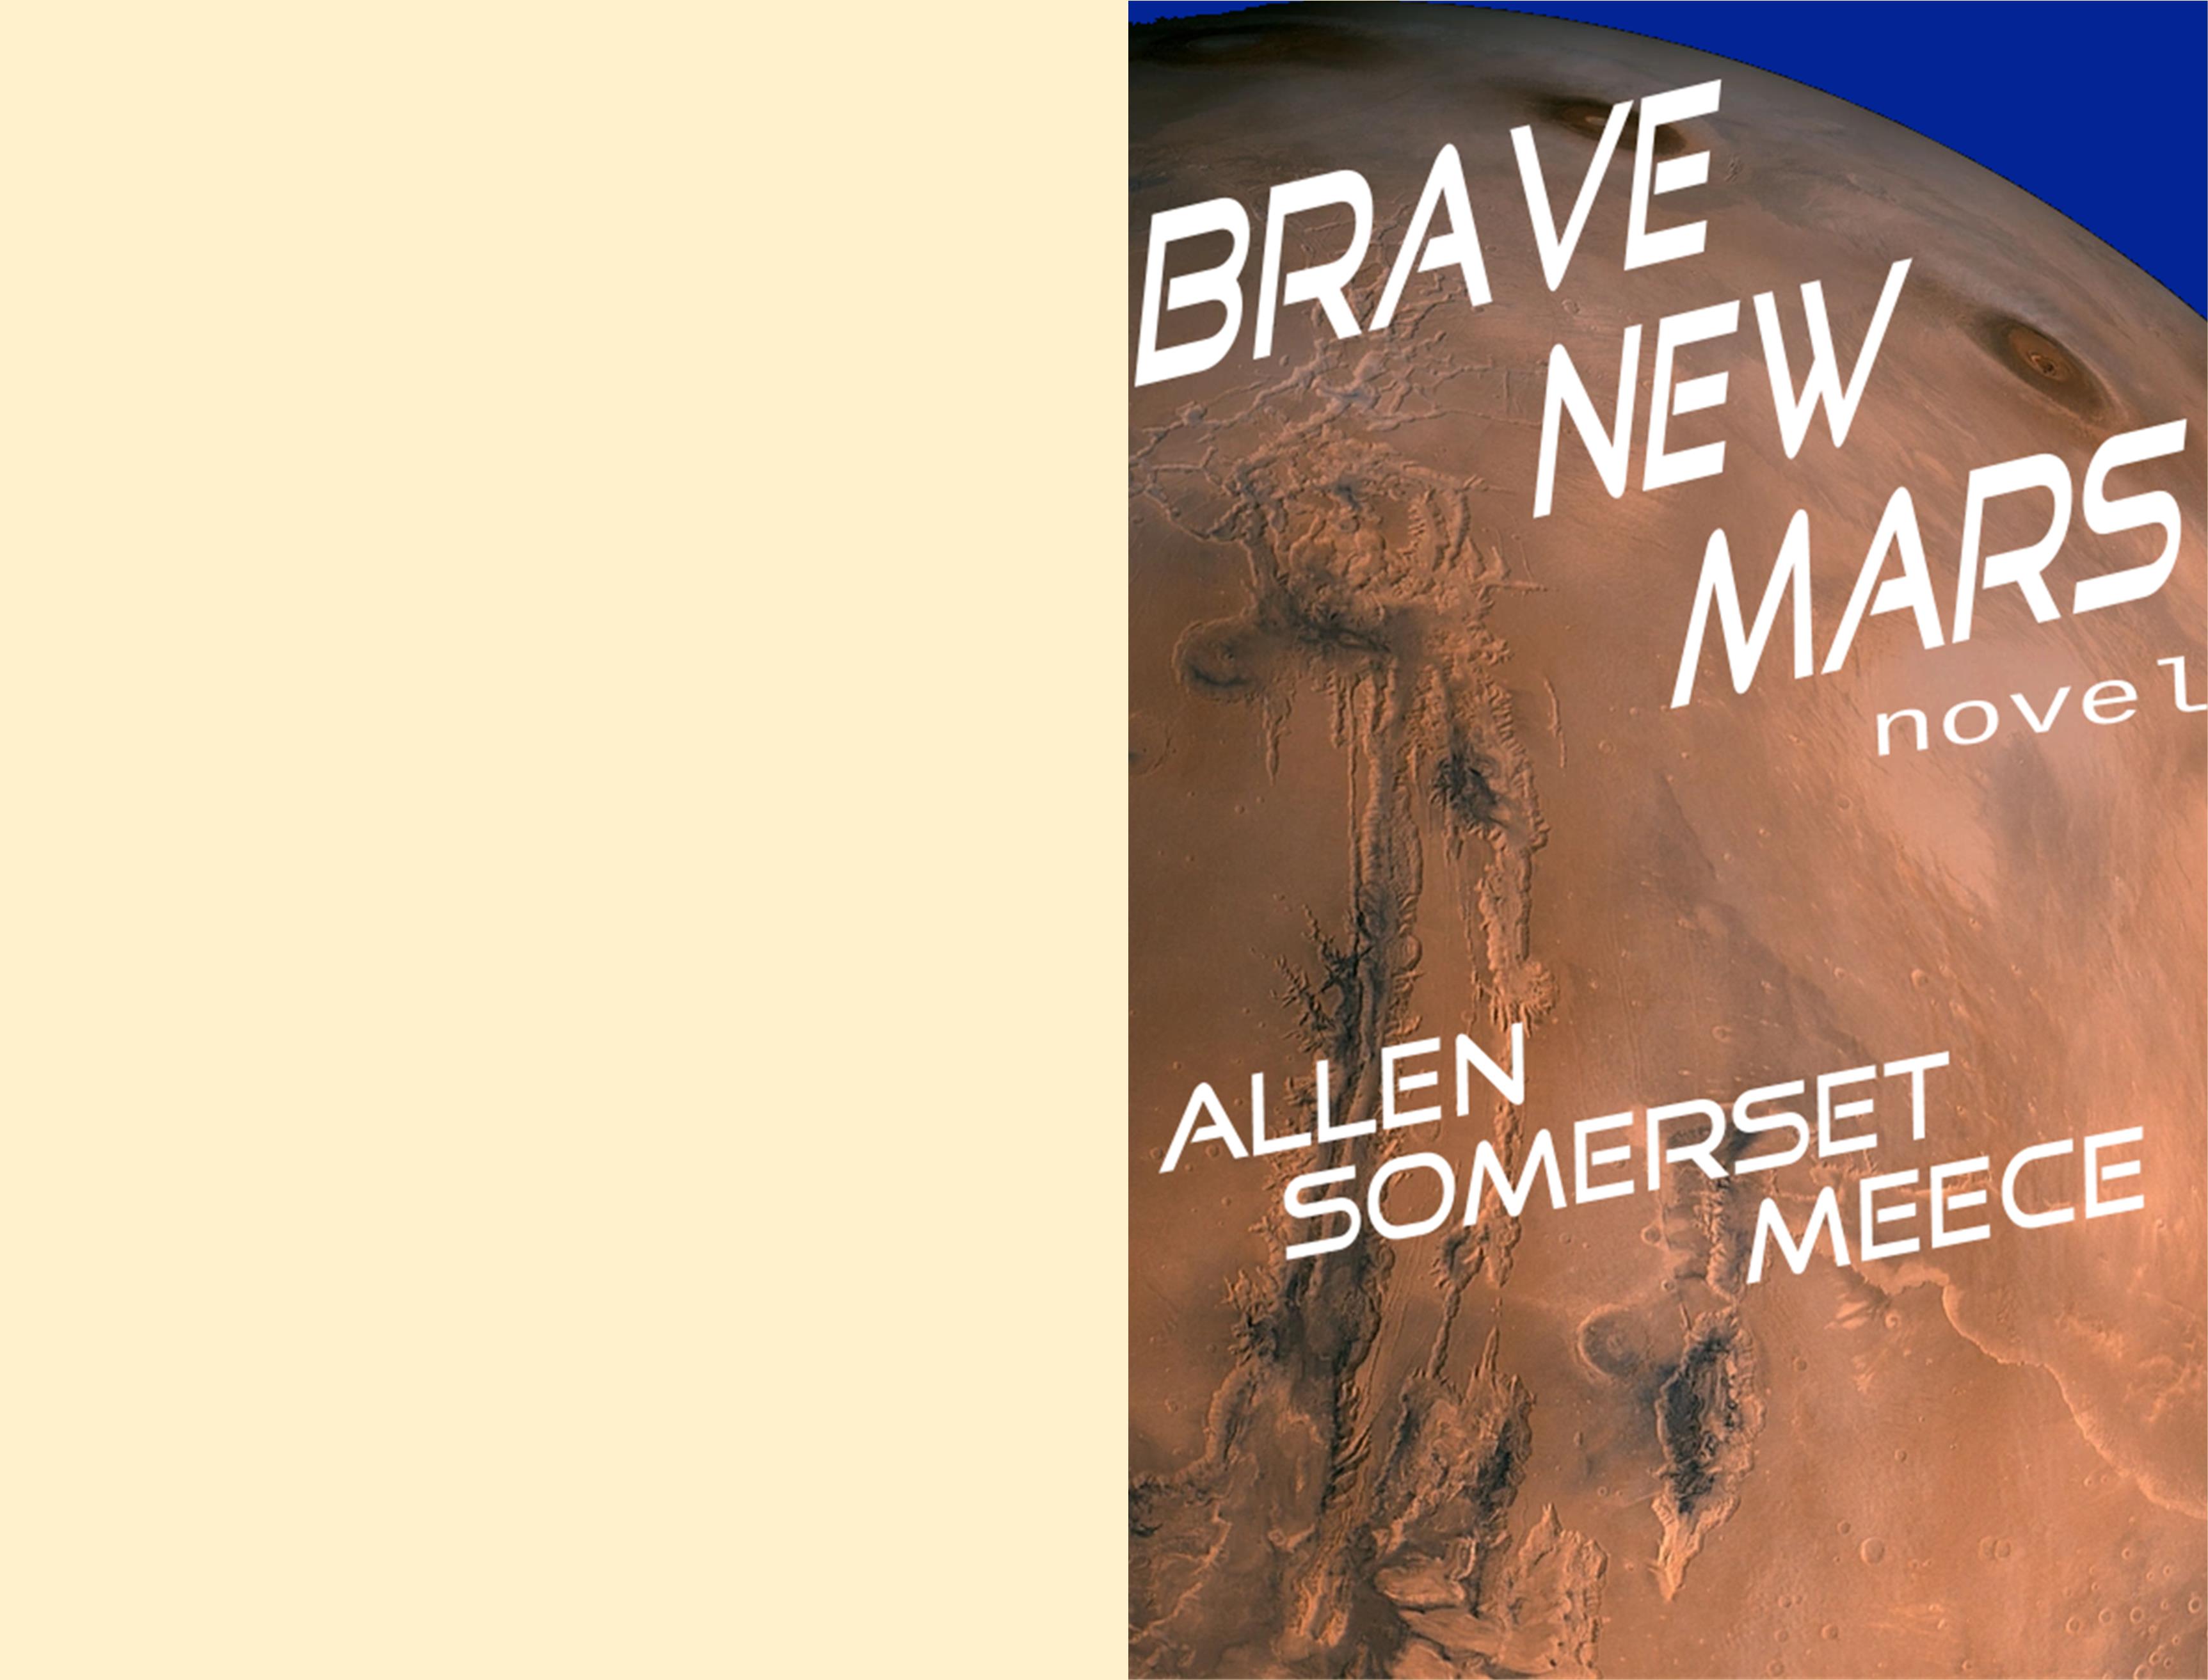 BRAVE NEW MARS, 2084 galley cover image